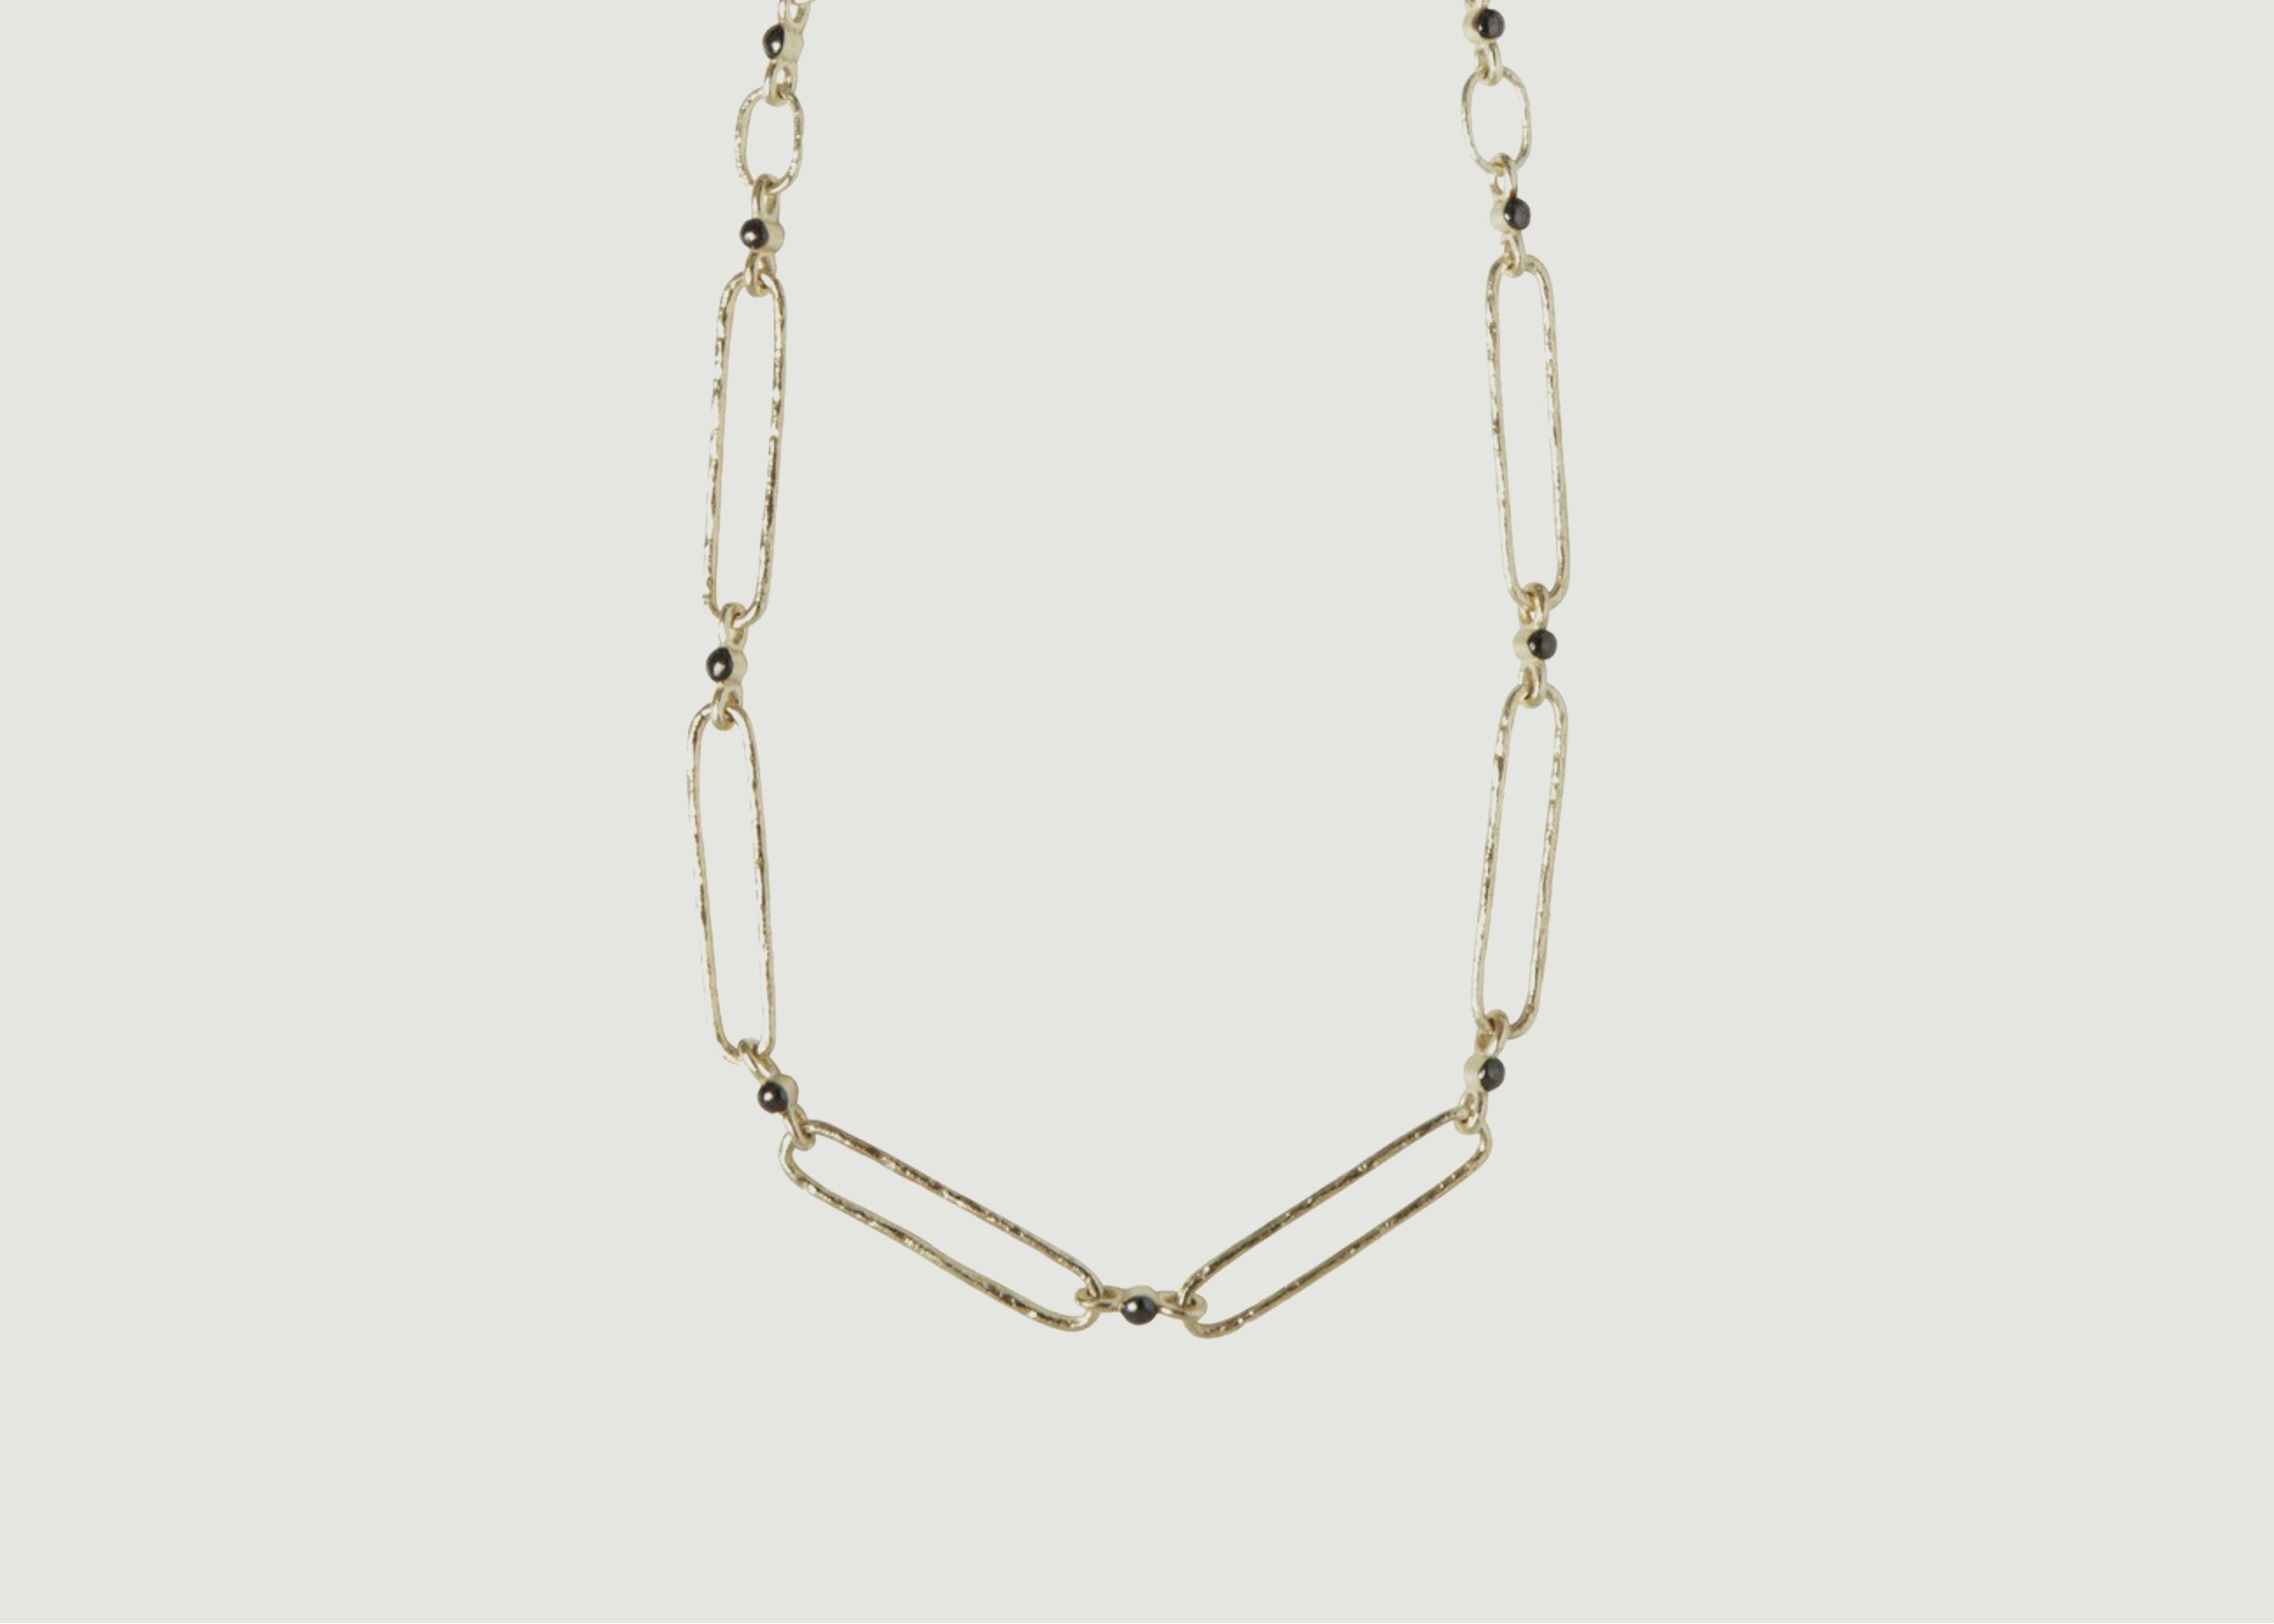 Jon necklace in silver gilded with 24 carat gold - 5 Octobre